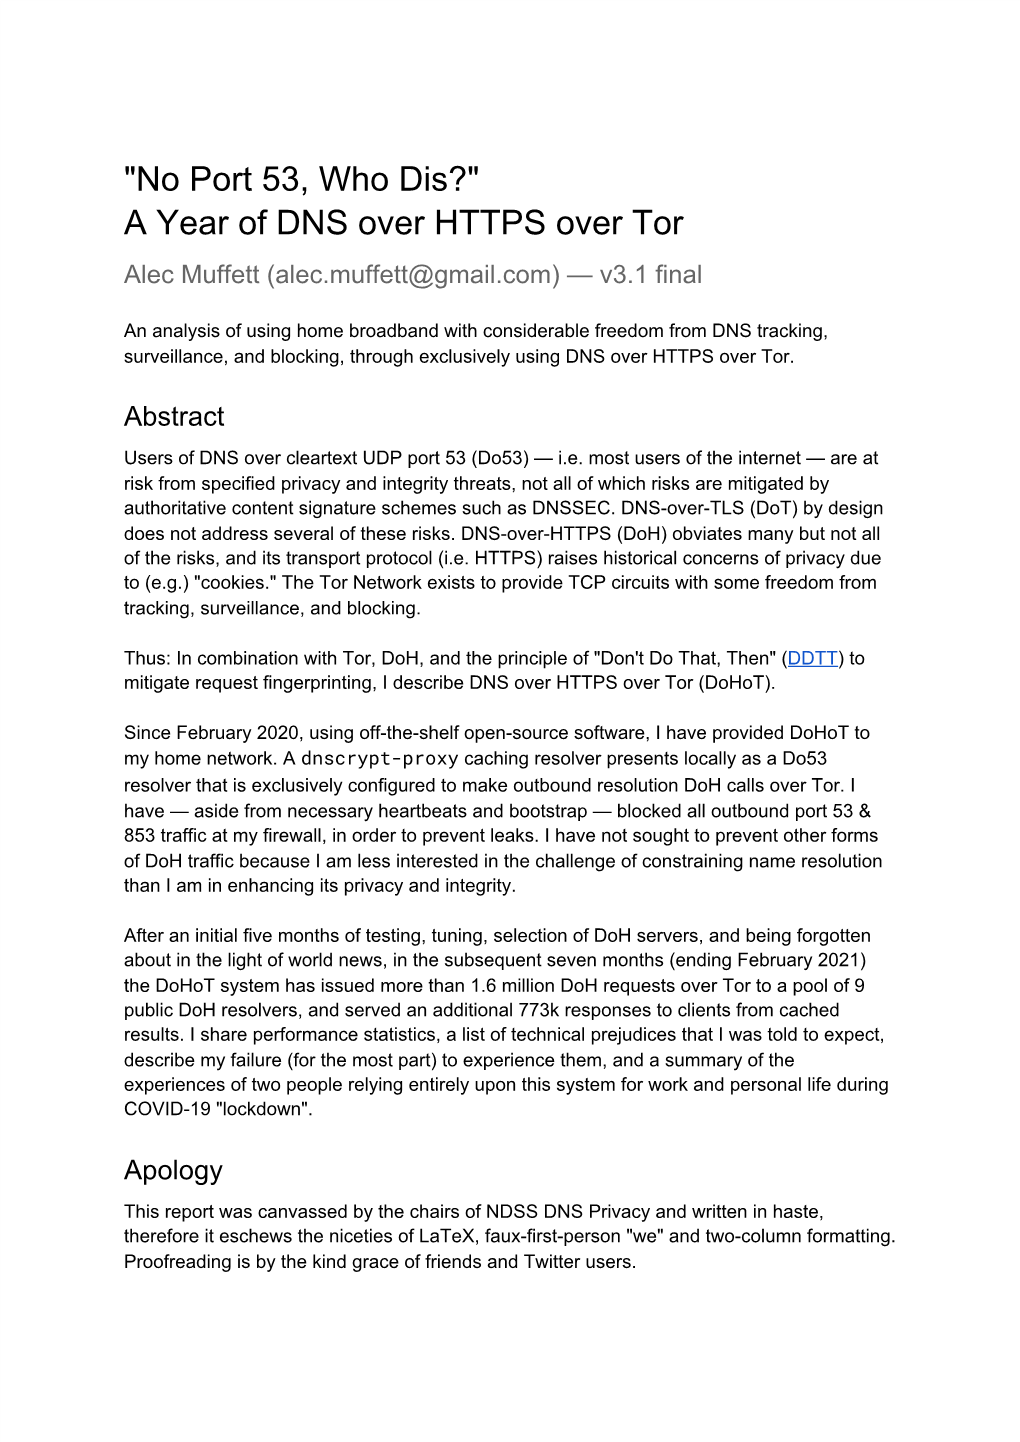 "No Port 53, Who Dis?" a Year of DNS Over HTTPS Over Tor Alec Muffett (Alec.Muffett@Gmail.Com) — V3.1 Final